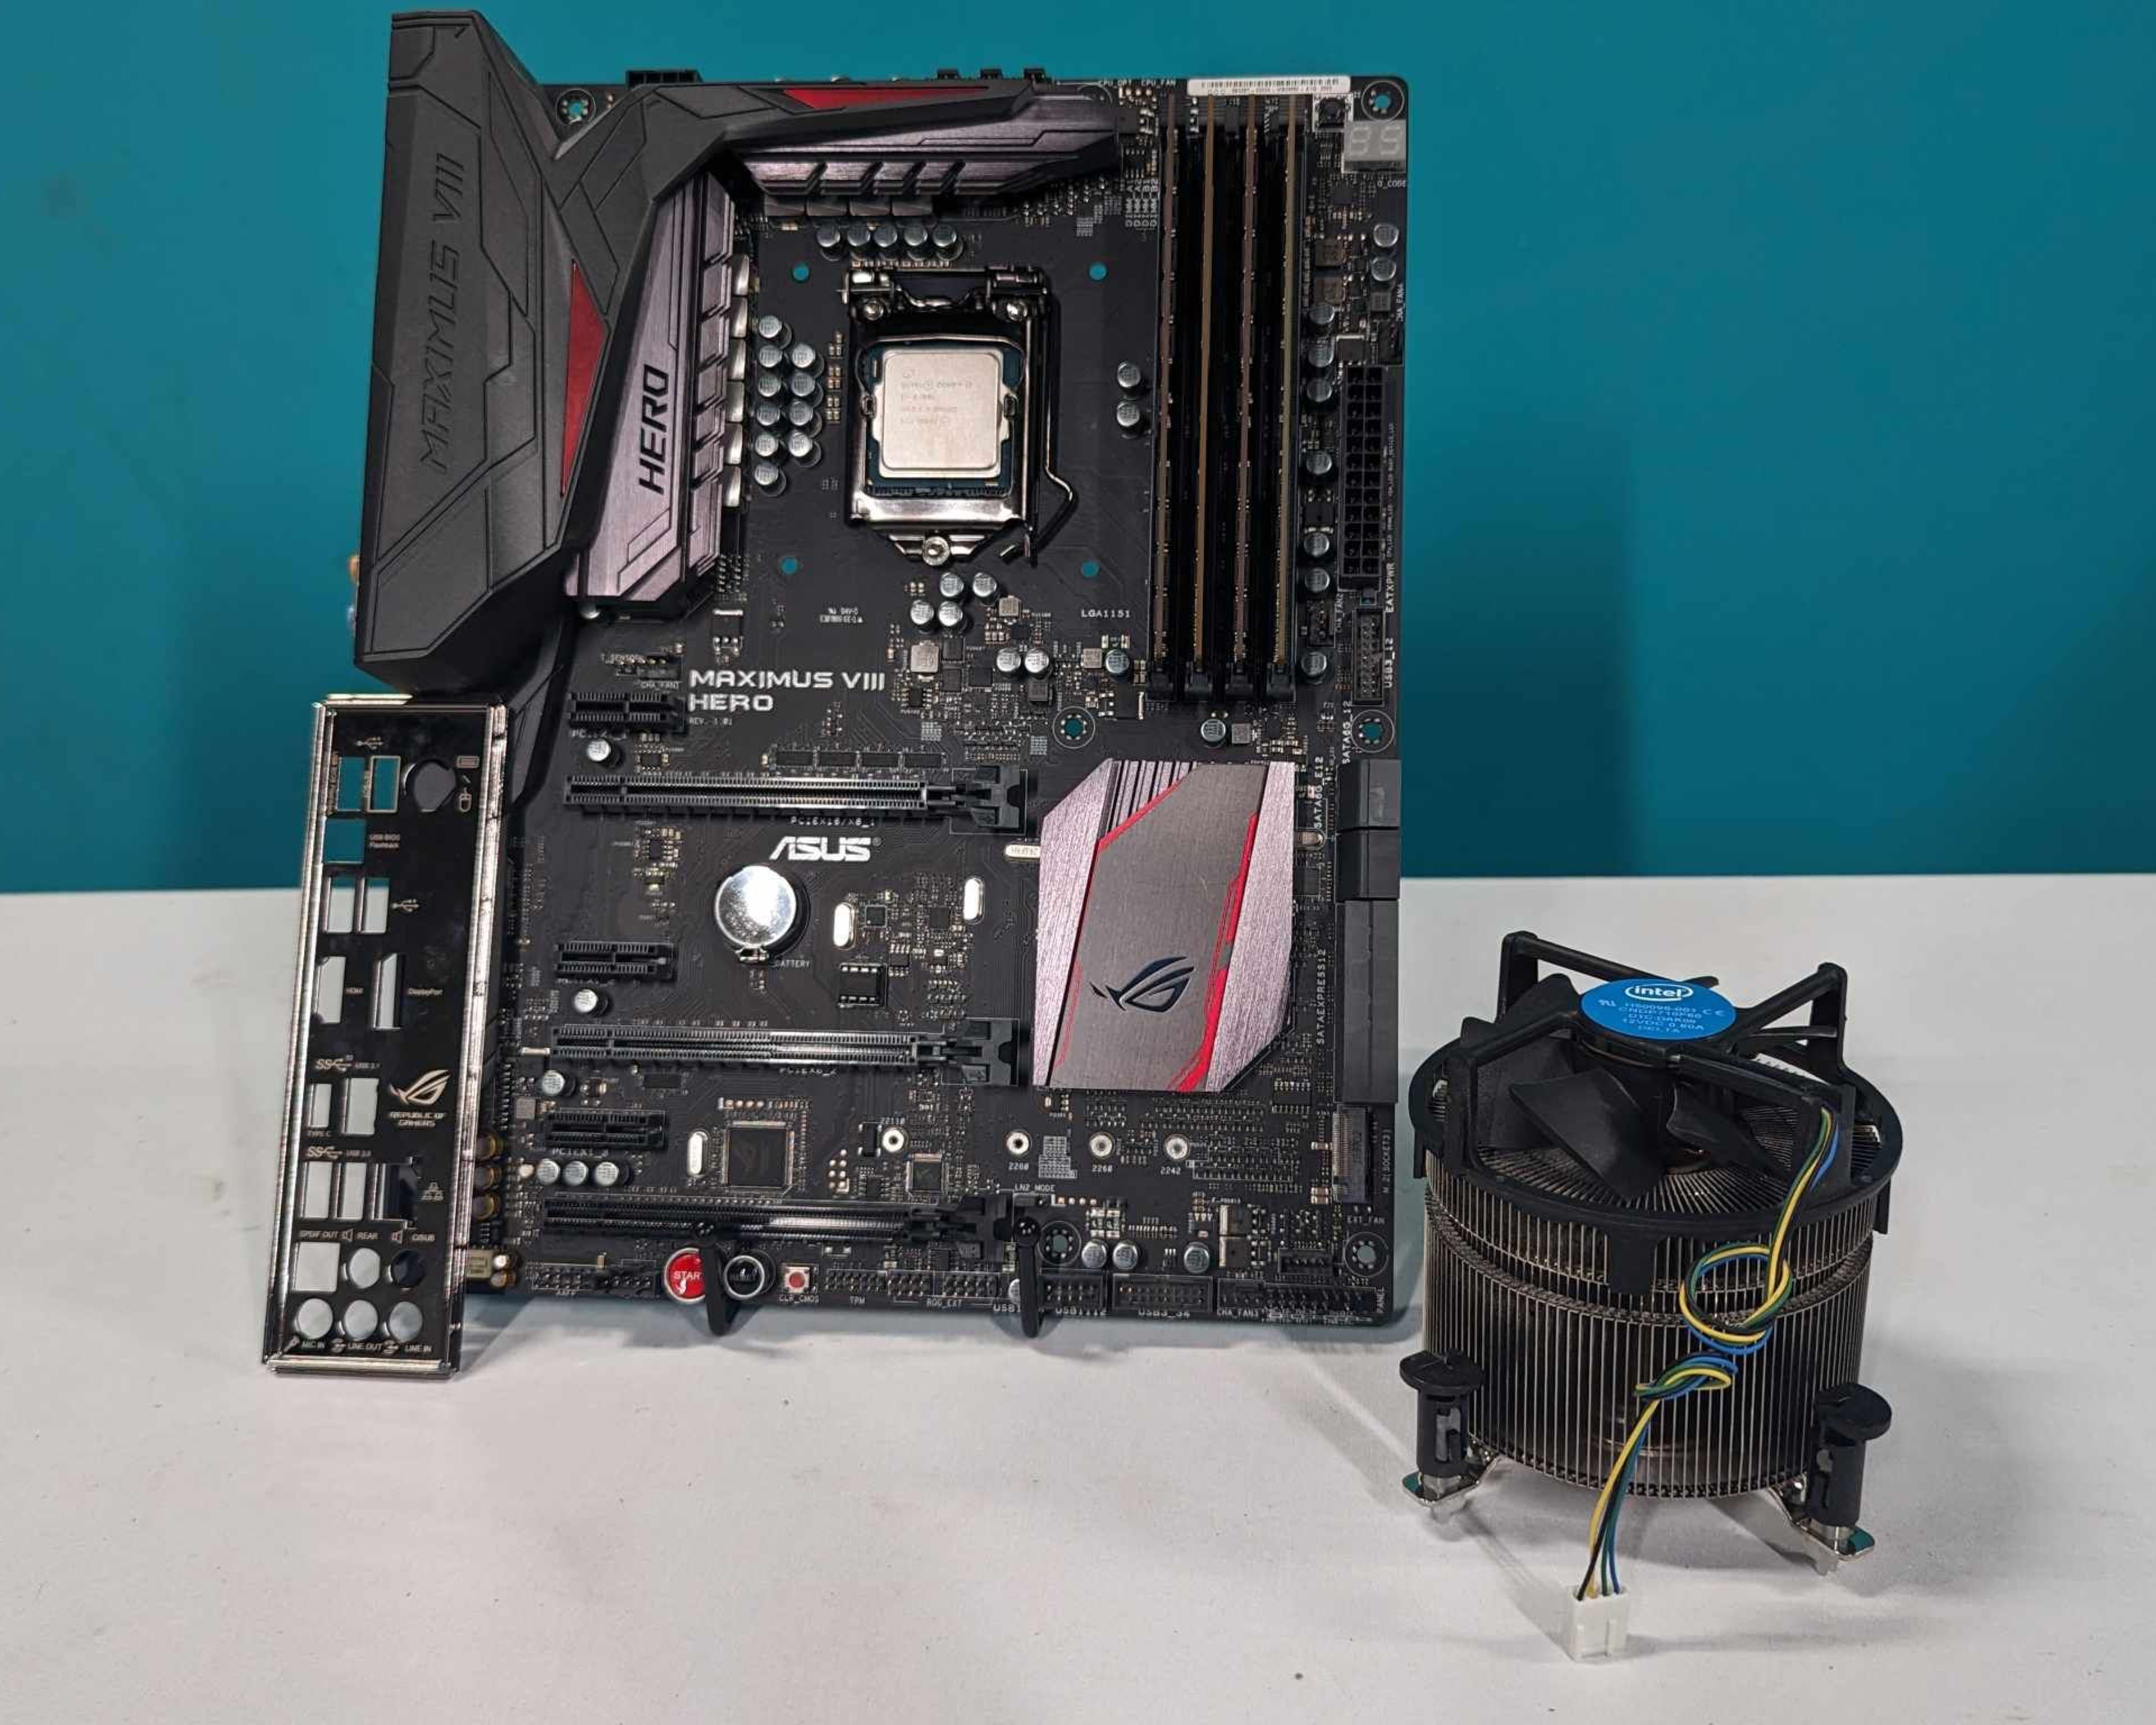 Asus Maximus VIII Hero Motherboard Kit. Populated with i7-6700k and 32gb ram. Has Cooler! Free Ship!